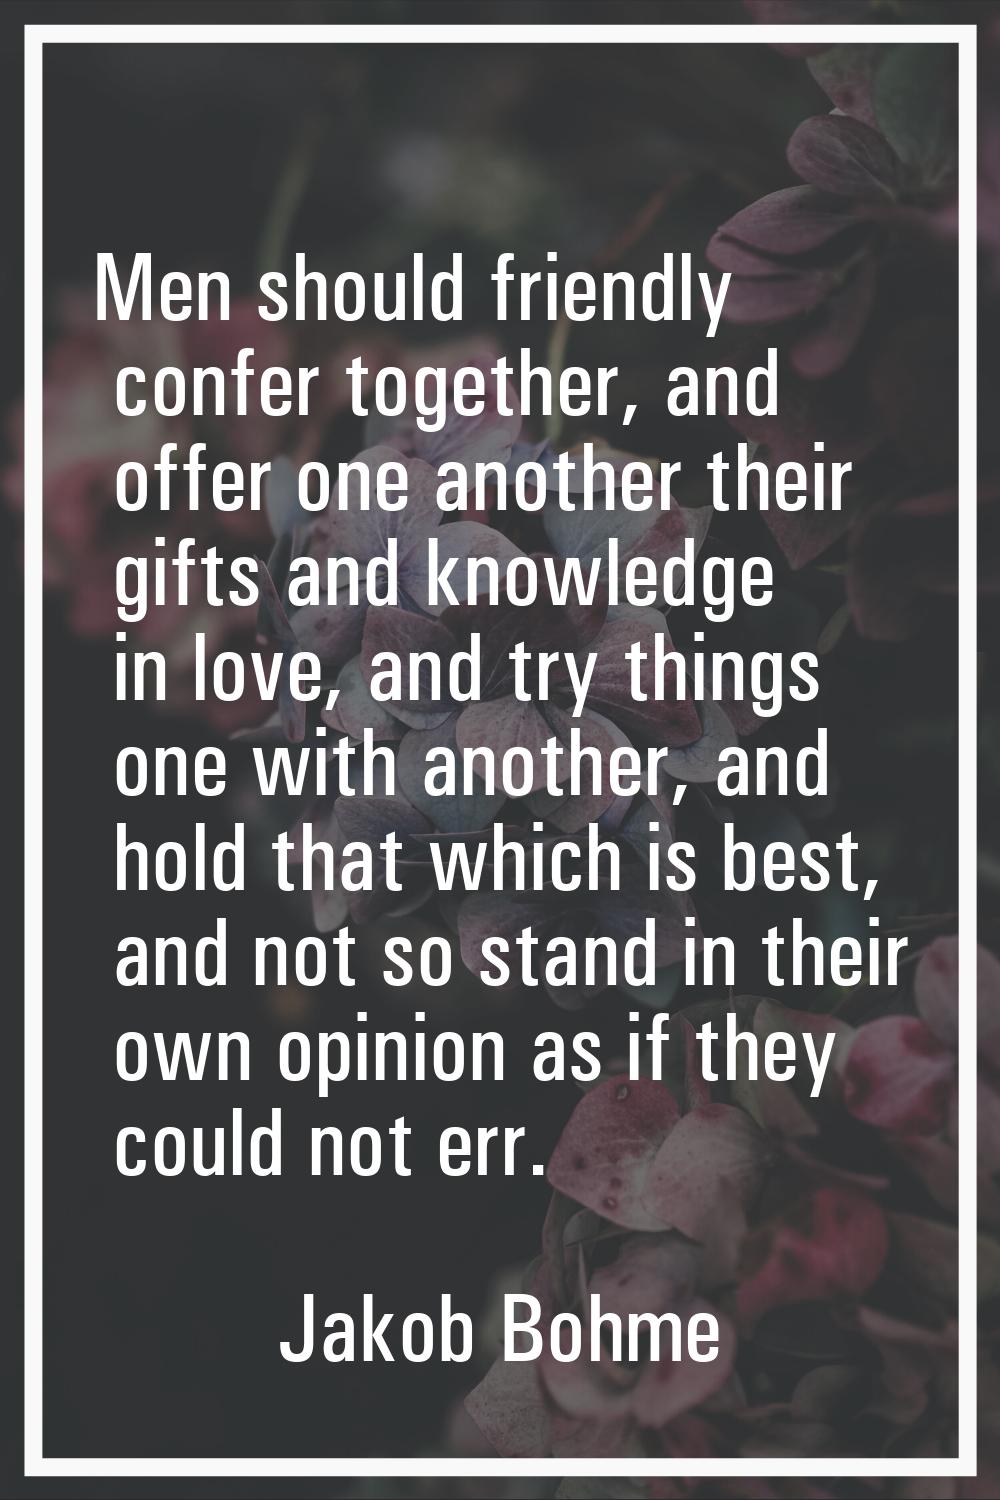 Men should friendly confer together, and offer one another their gifts and knowledge in love, and t